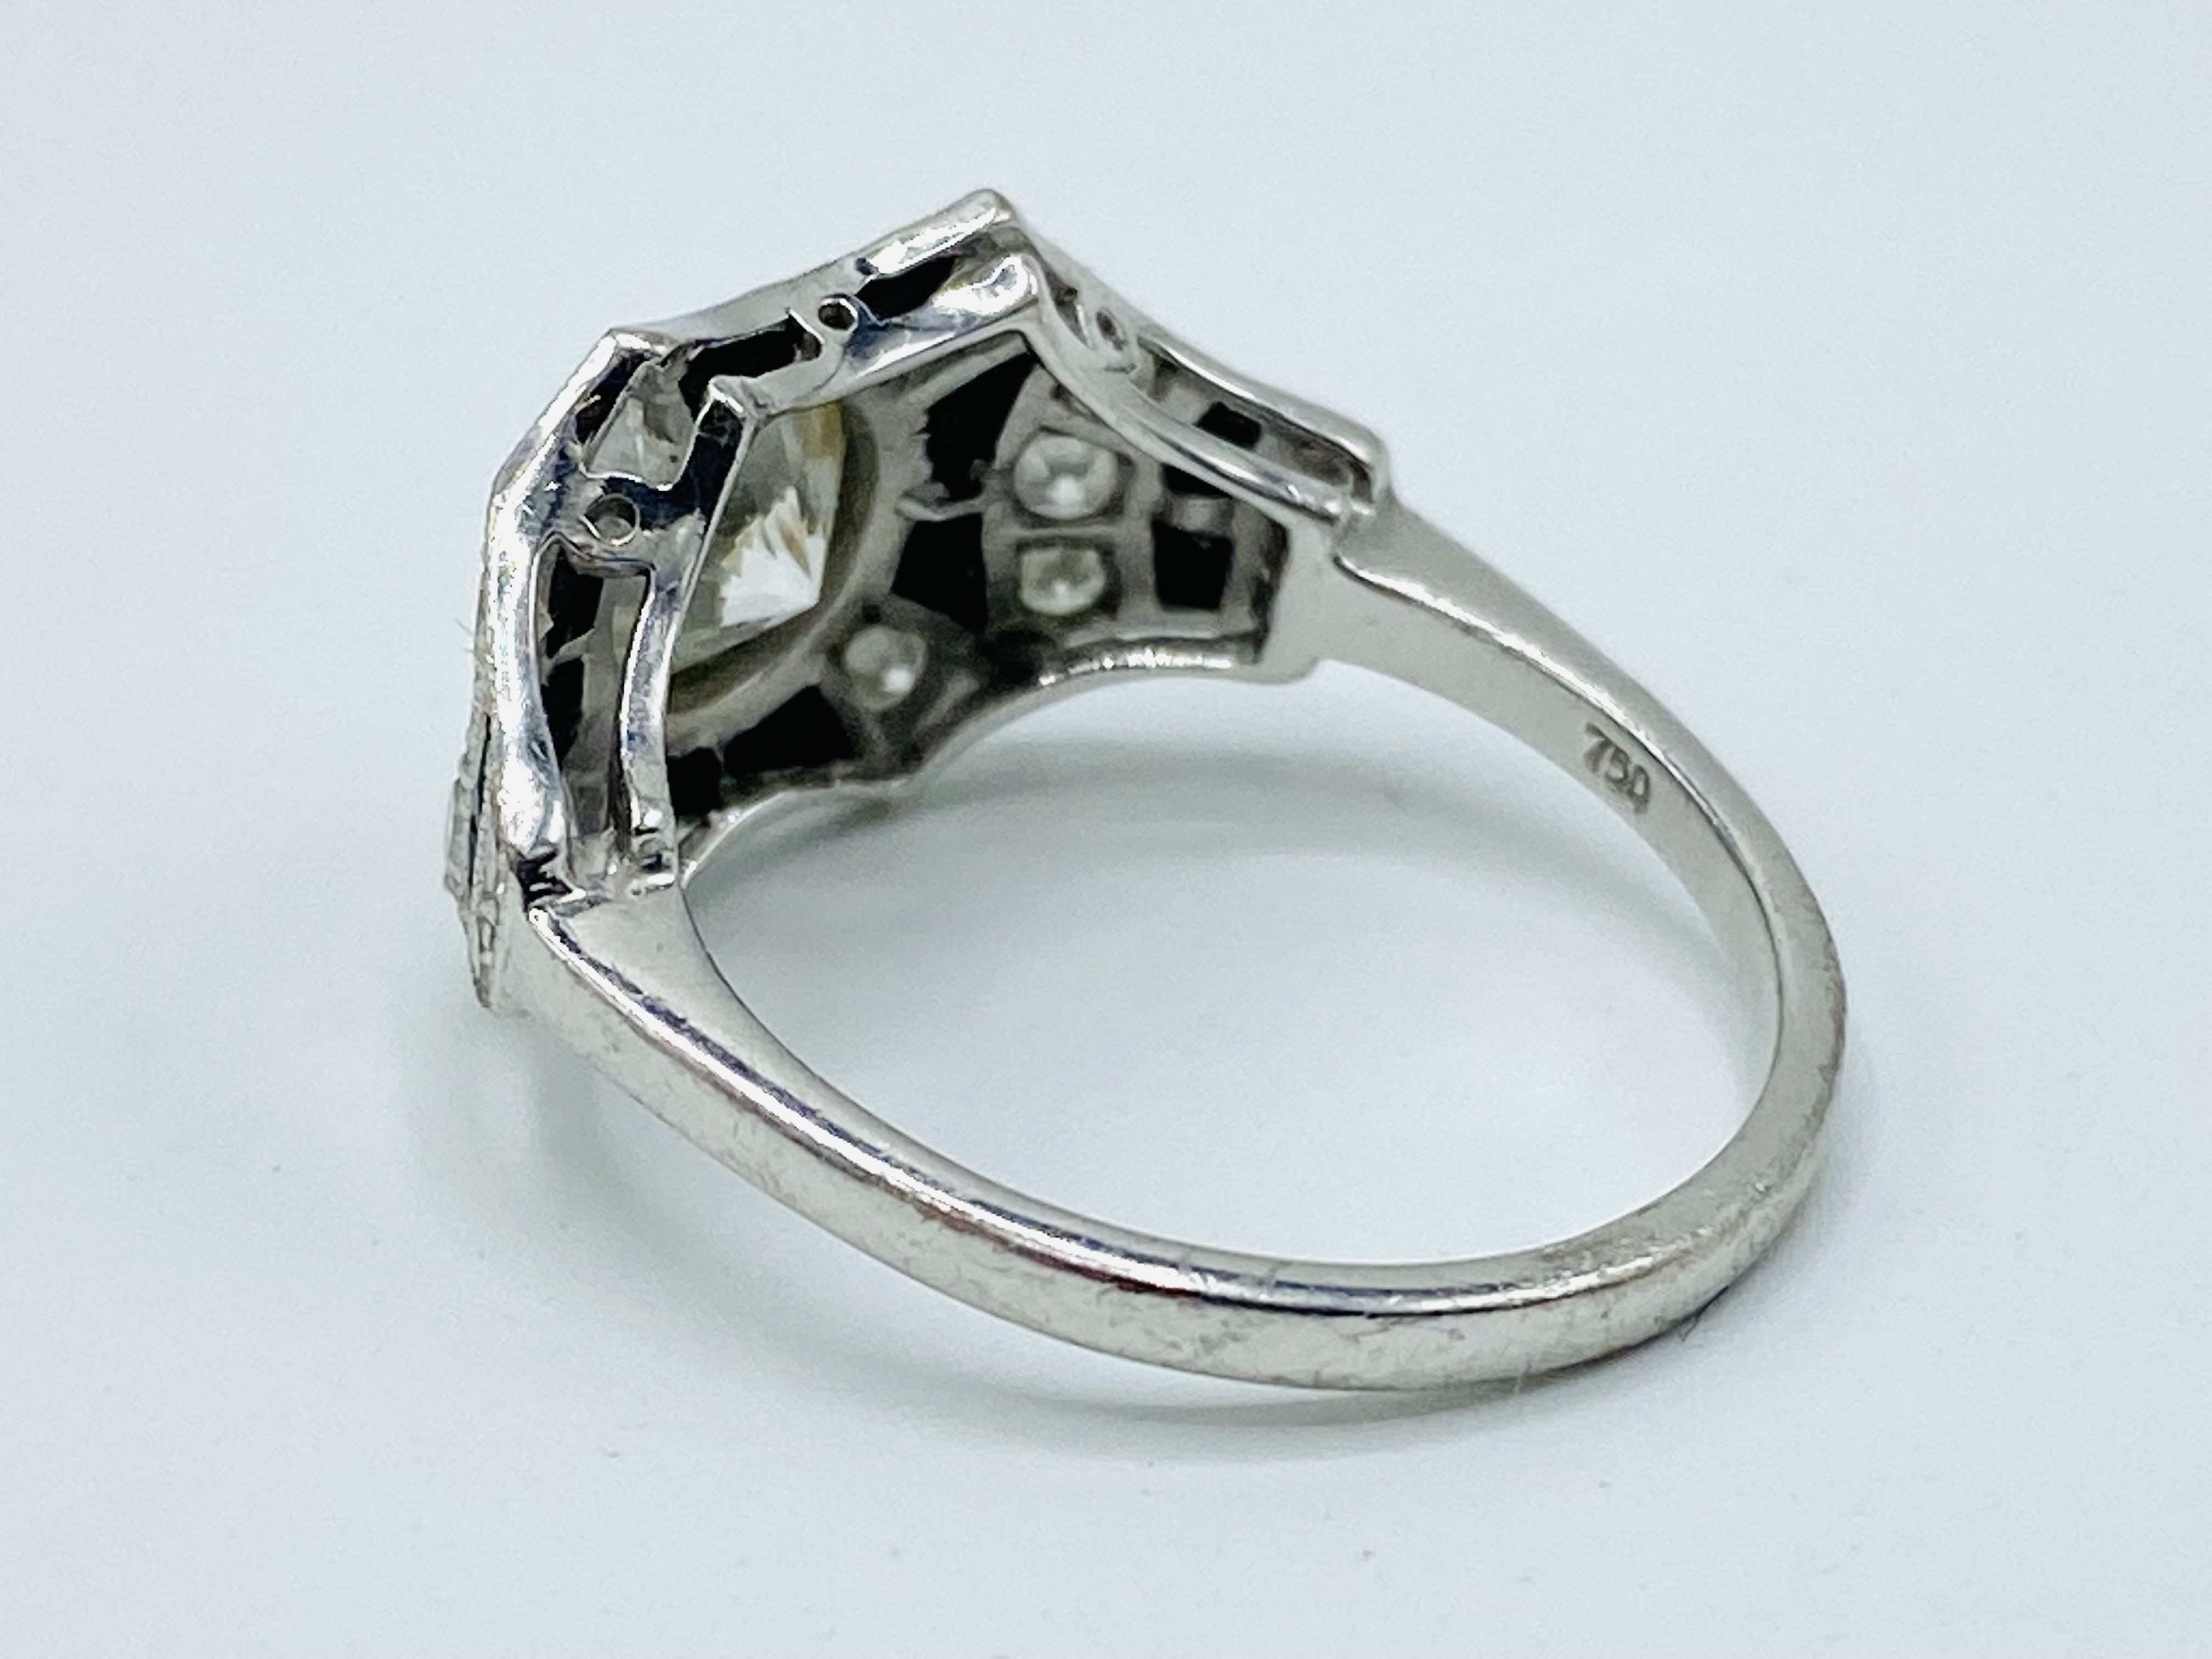 18ct white gold, diamond and black onyx ring - Image 5 of 6